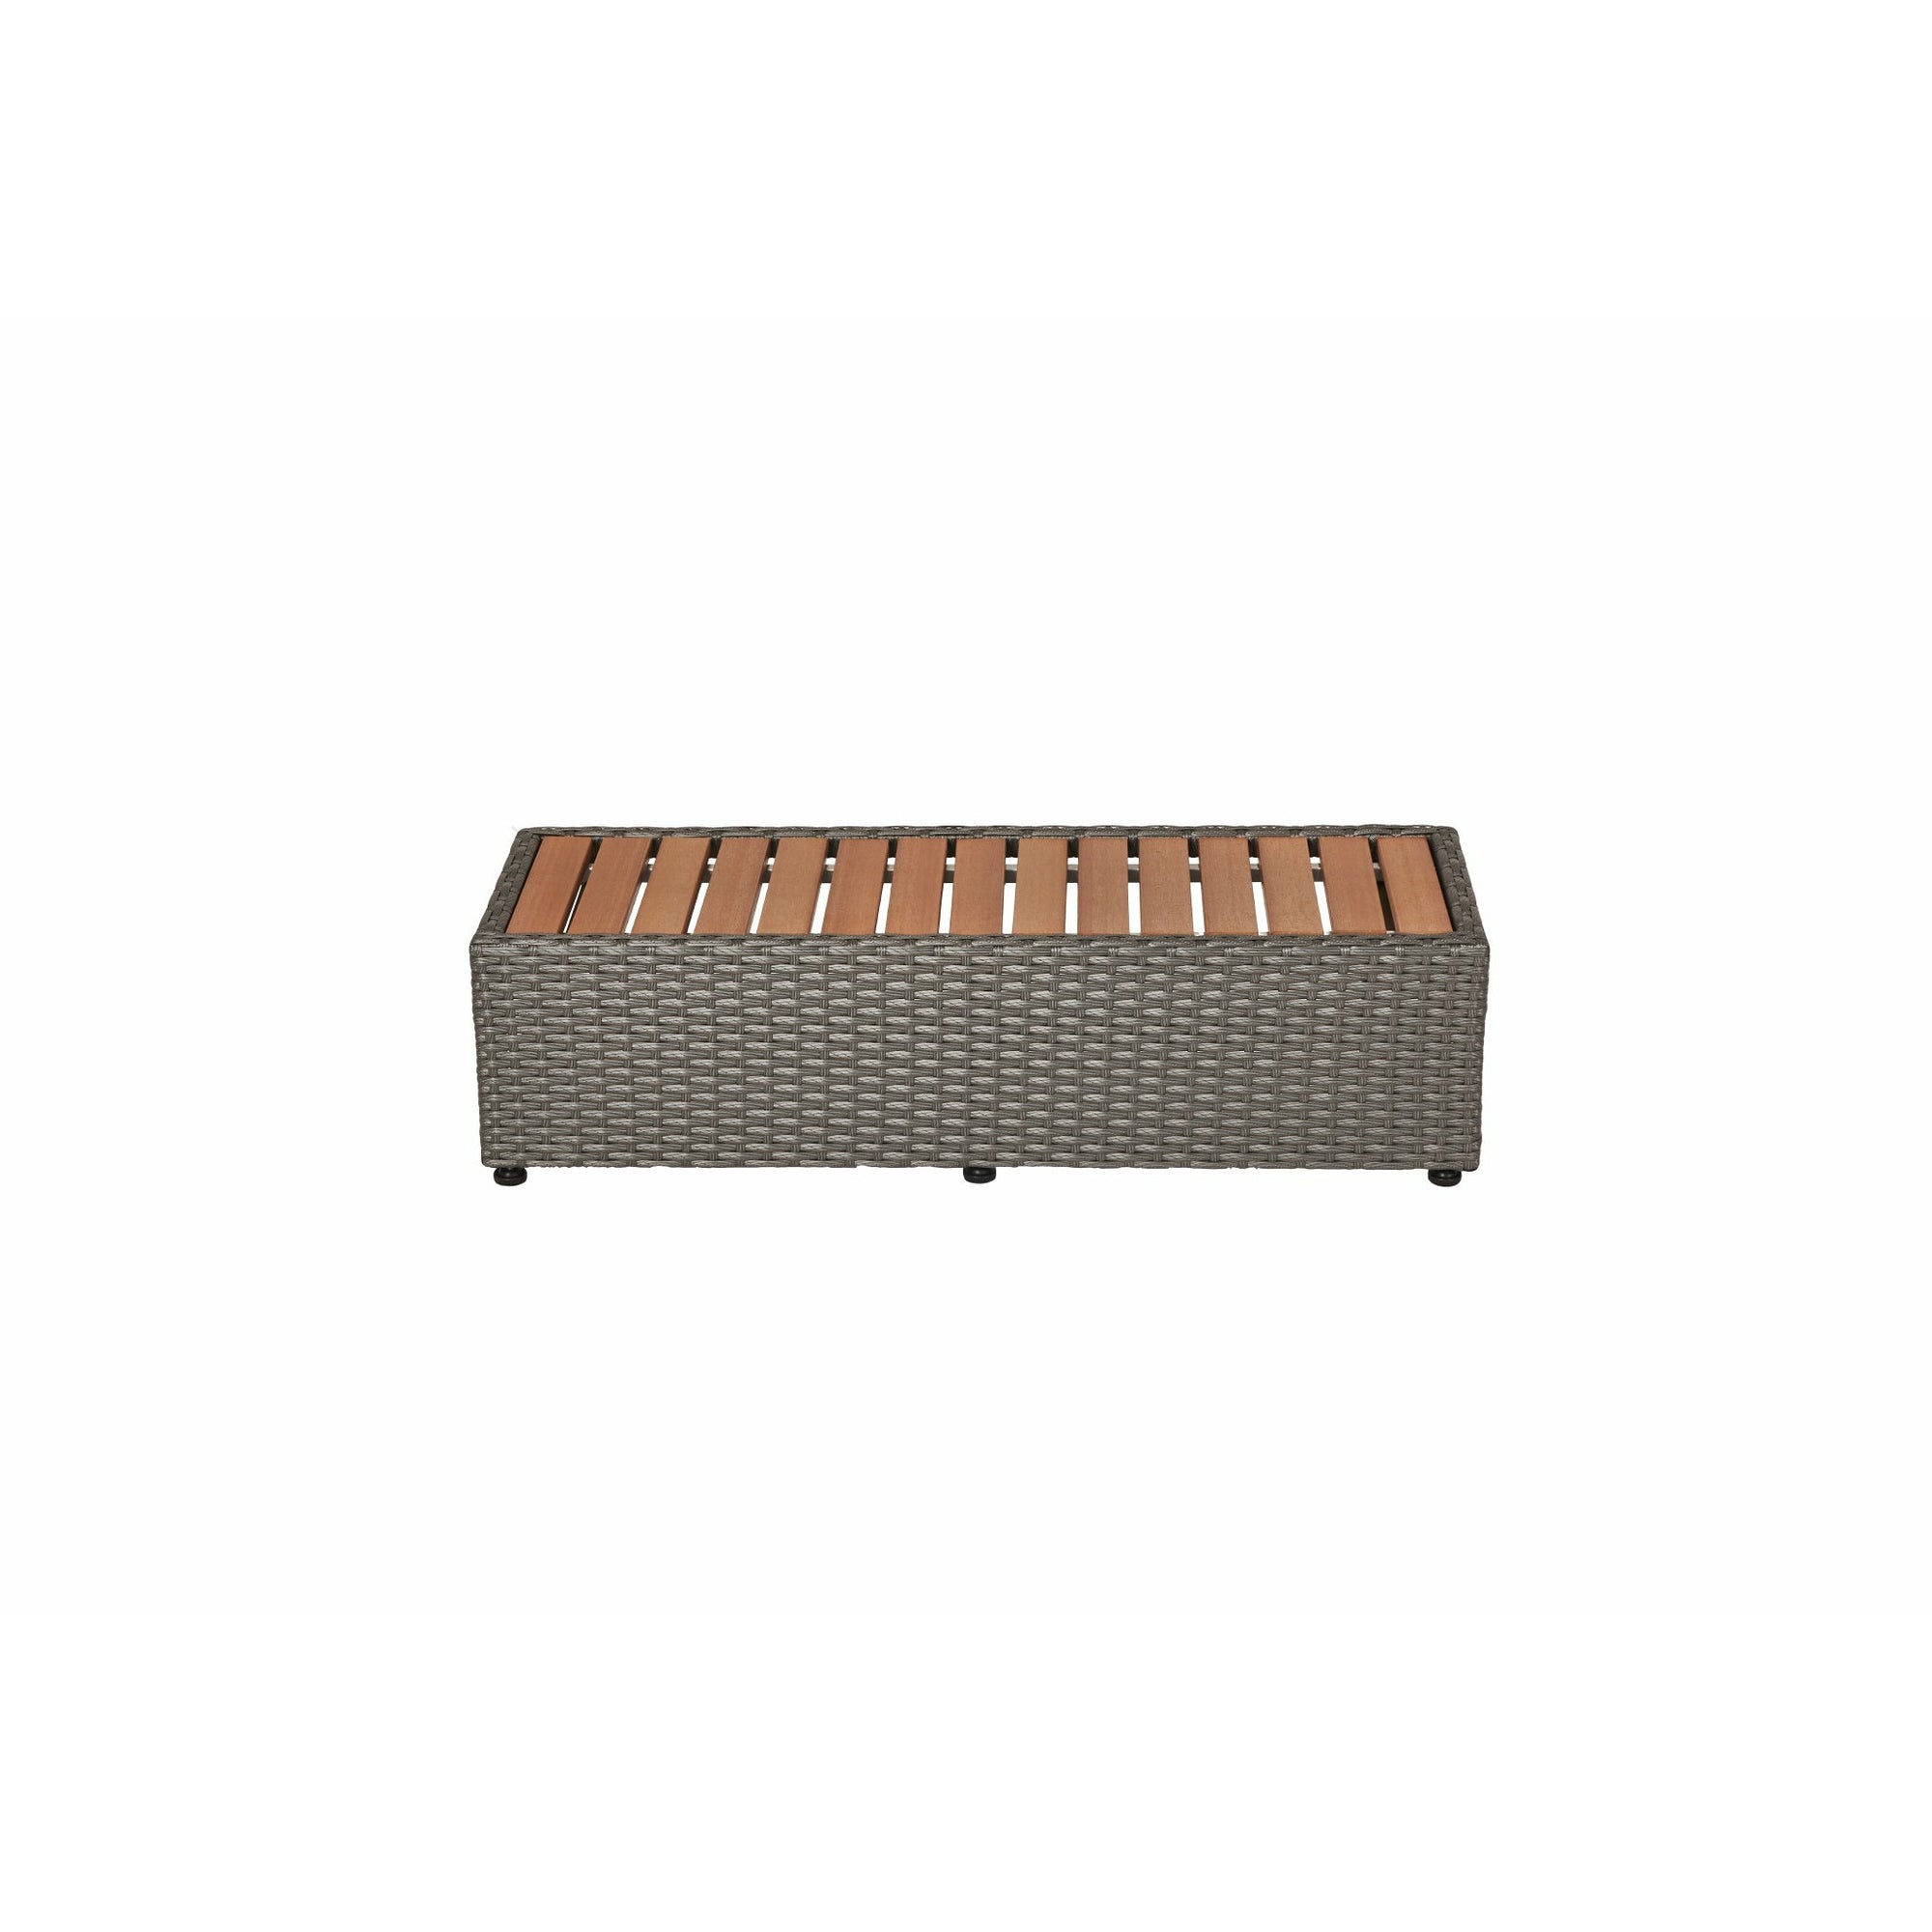 MSpa Wicker Step for 6-person square spa - cool grey color in a white background